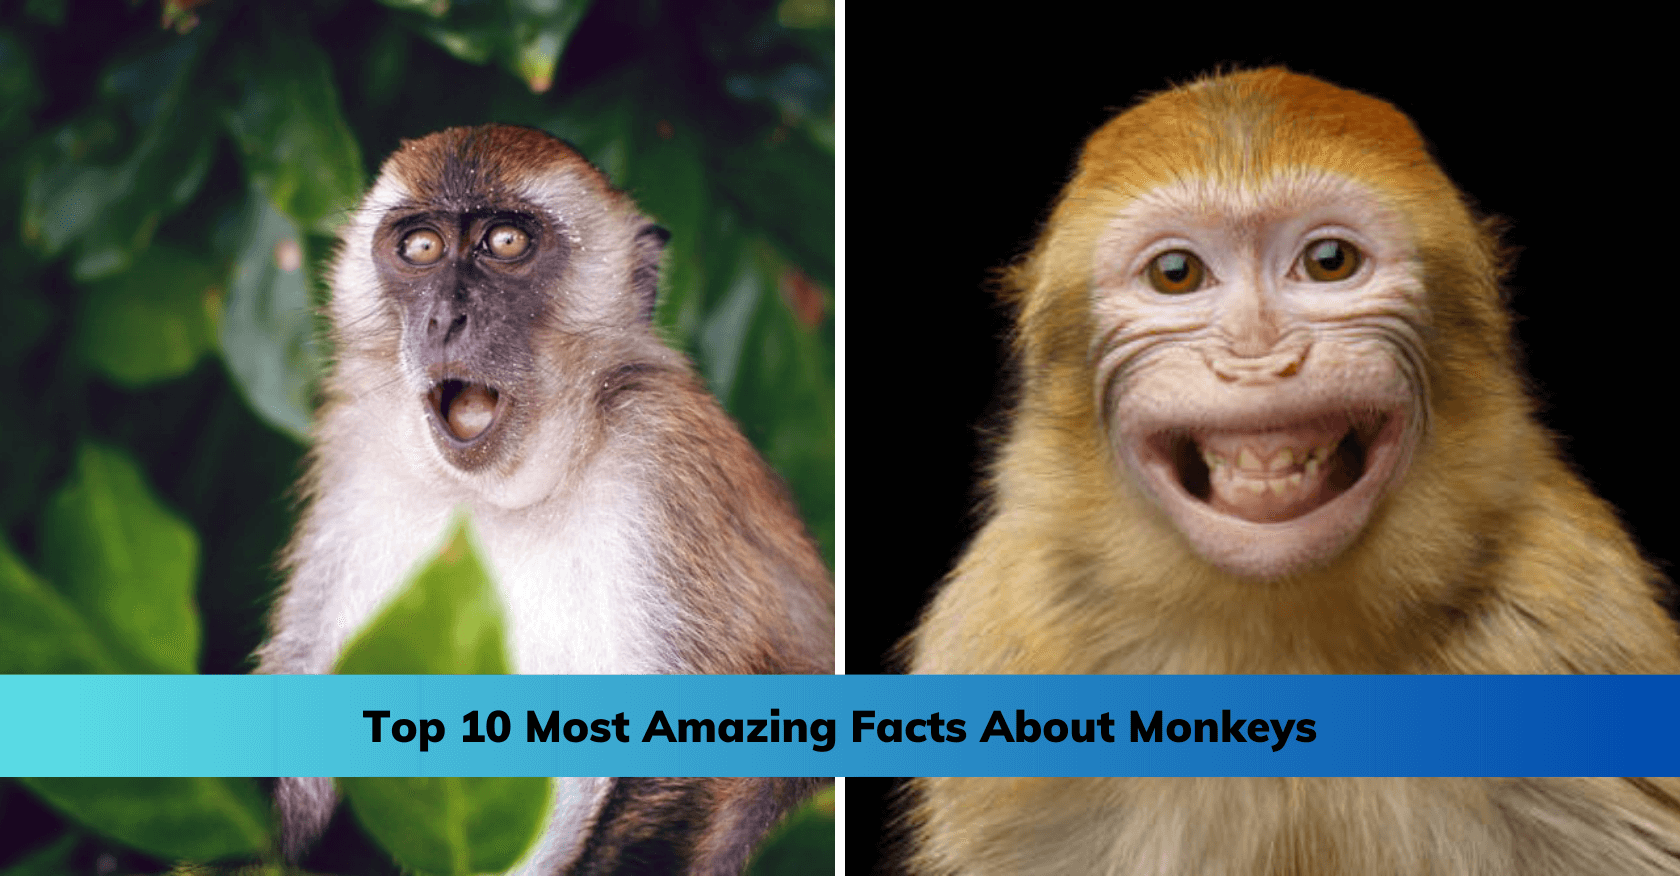 Top 10 Most Amazing Facts About Monkeys